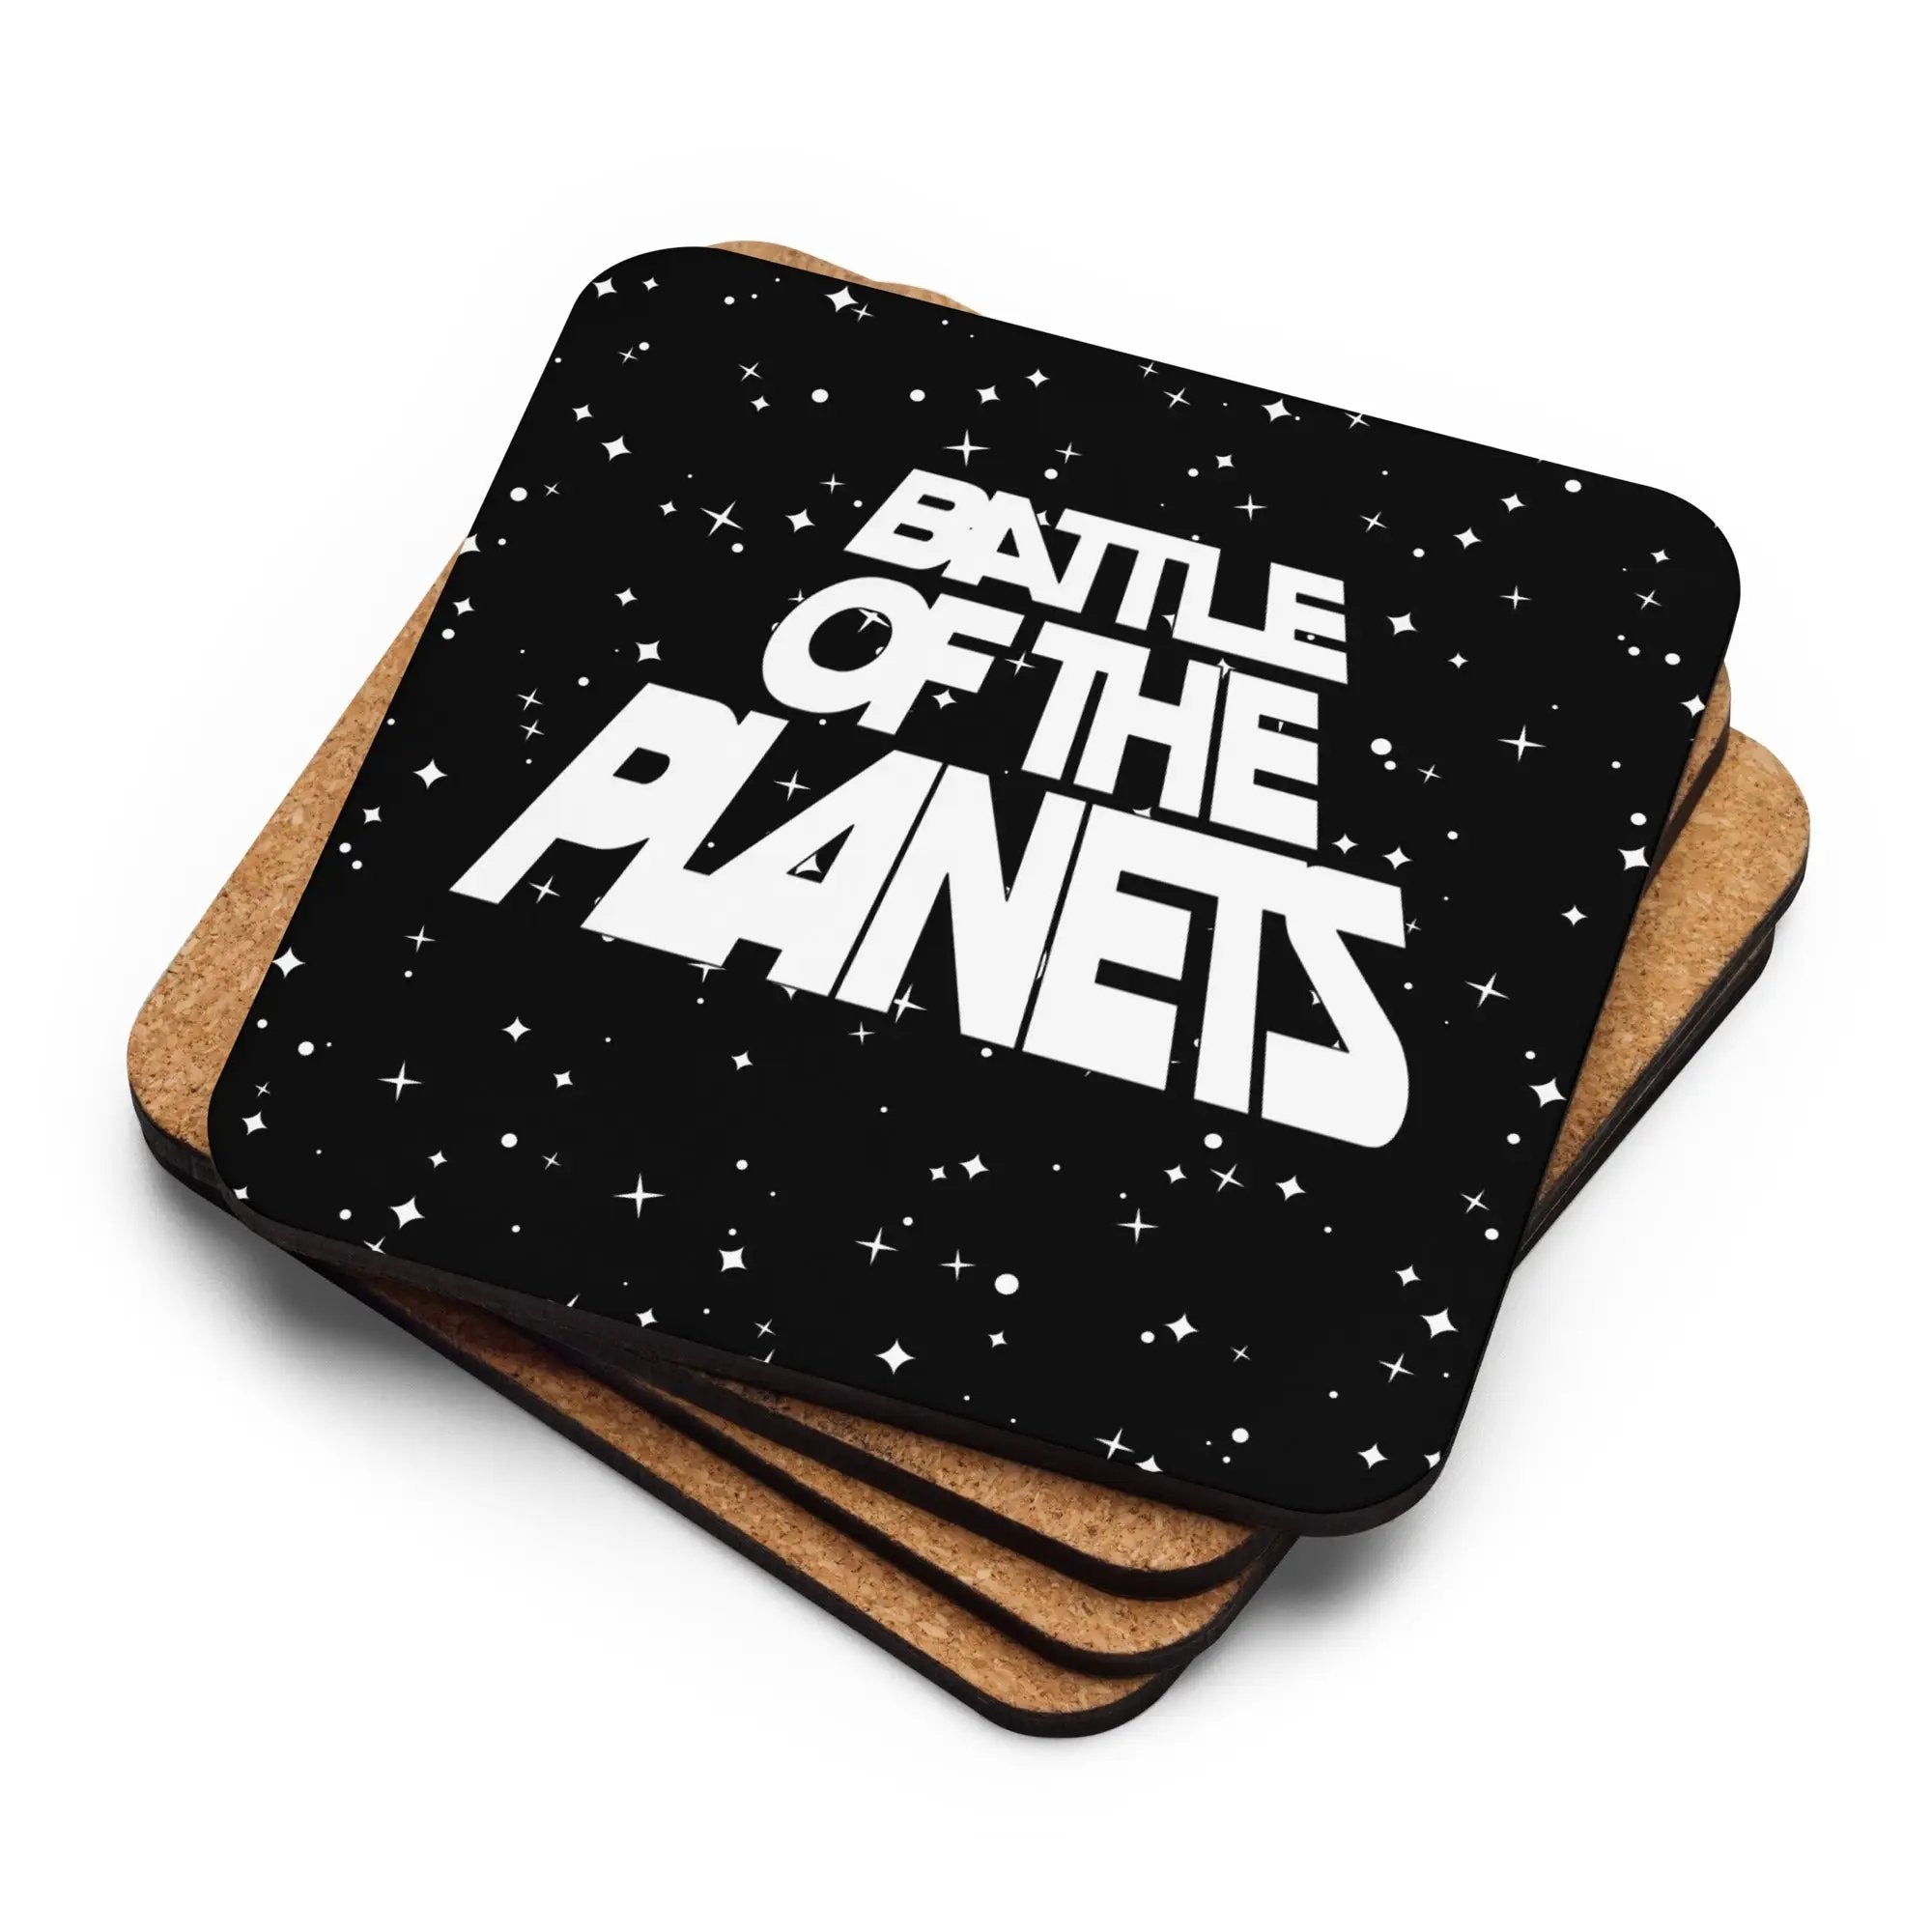 Battle of The Planets Cork-back coaster